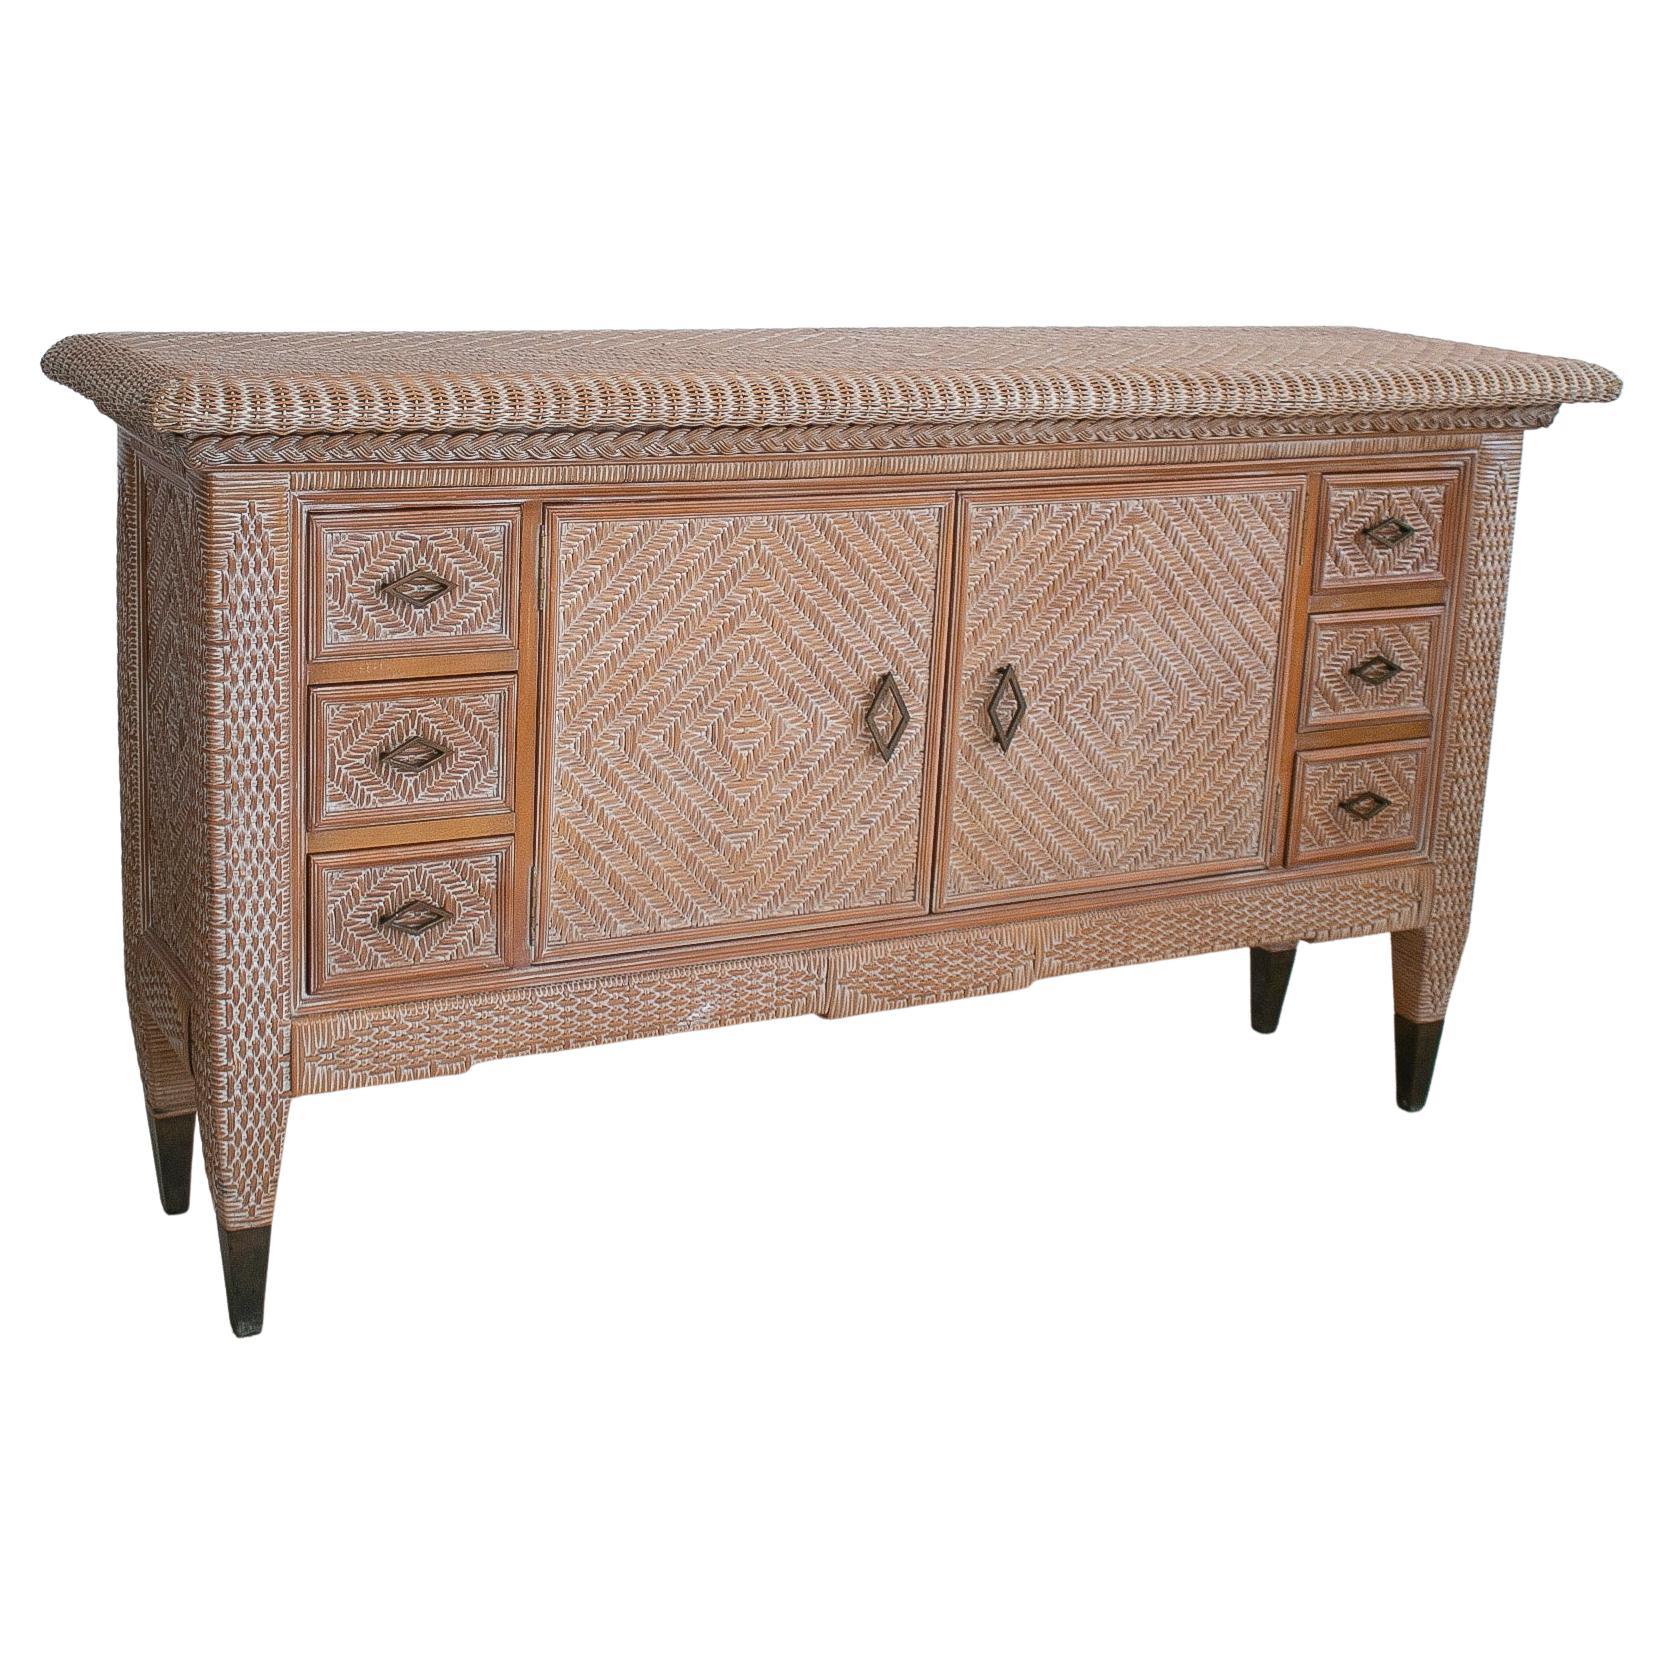 1980s Spanish 6-Drawer & 2-Door Woven Wicker on Wood Sideboard Table For Sale